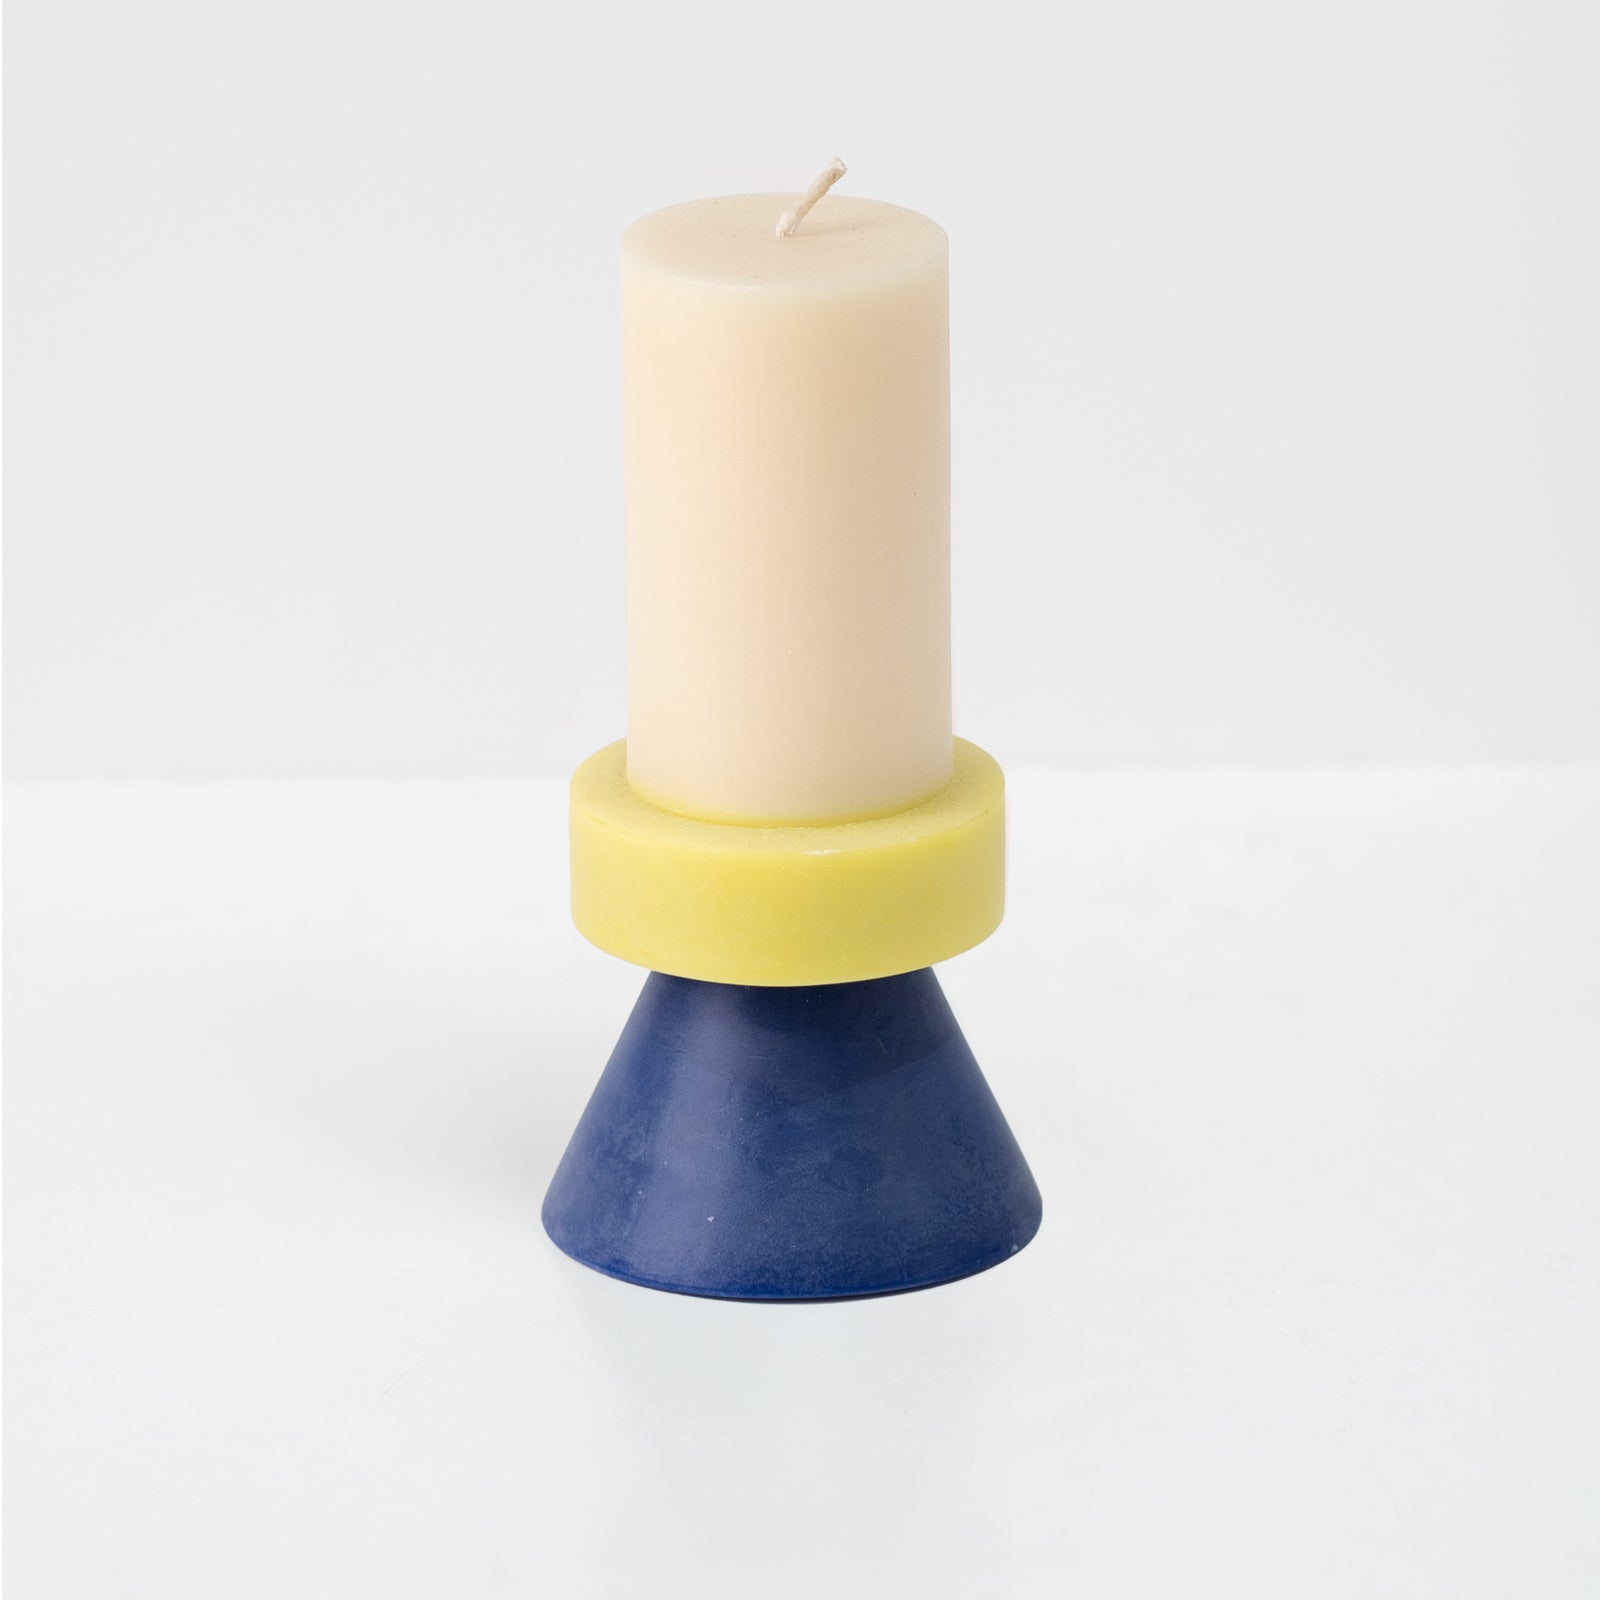 Tall Stack Candle by Yod and Co in white, yellow and blue